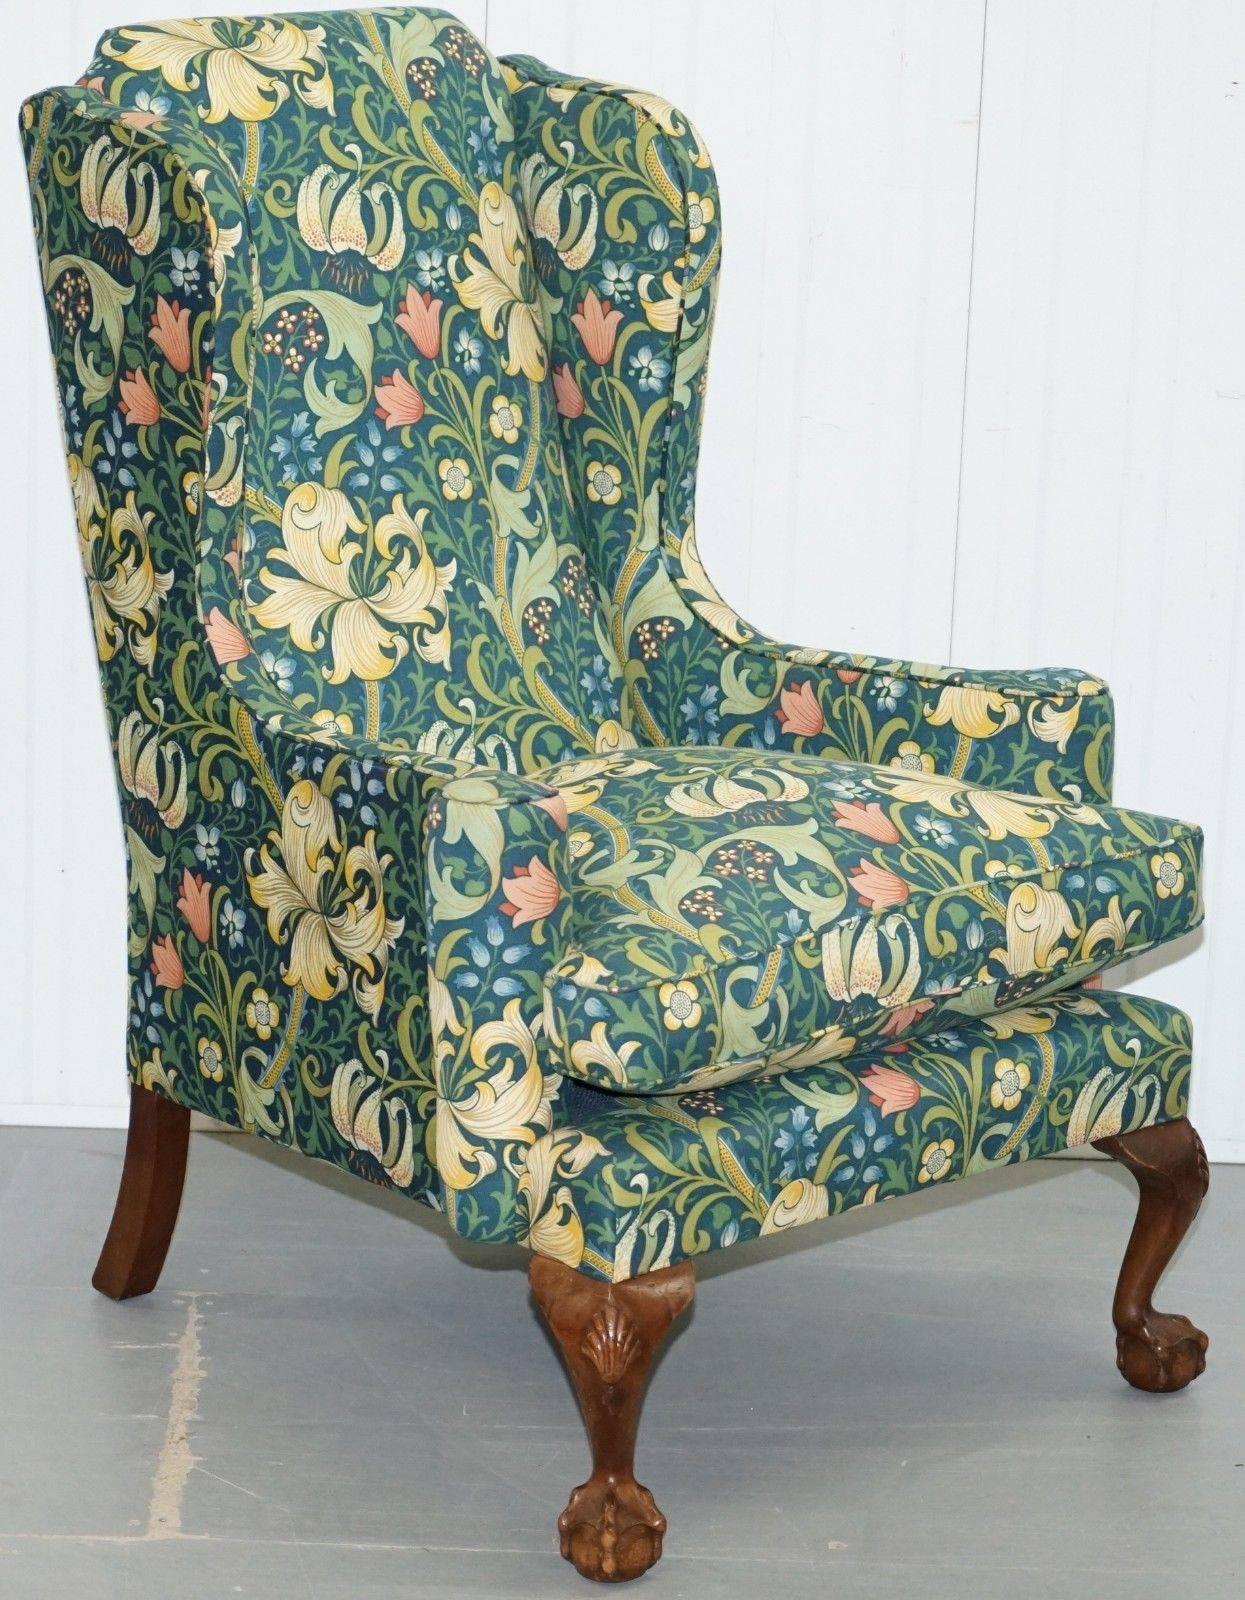 We are delighted to offer for sale this stunning Walnut framed William Morris Golden Lily upholstered Georgian Irish style Victorian Wingback armchair and stool

A very large grand wingback armchair with a lovely slightly laid-back seating